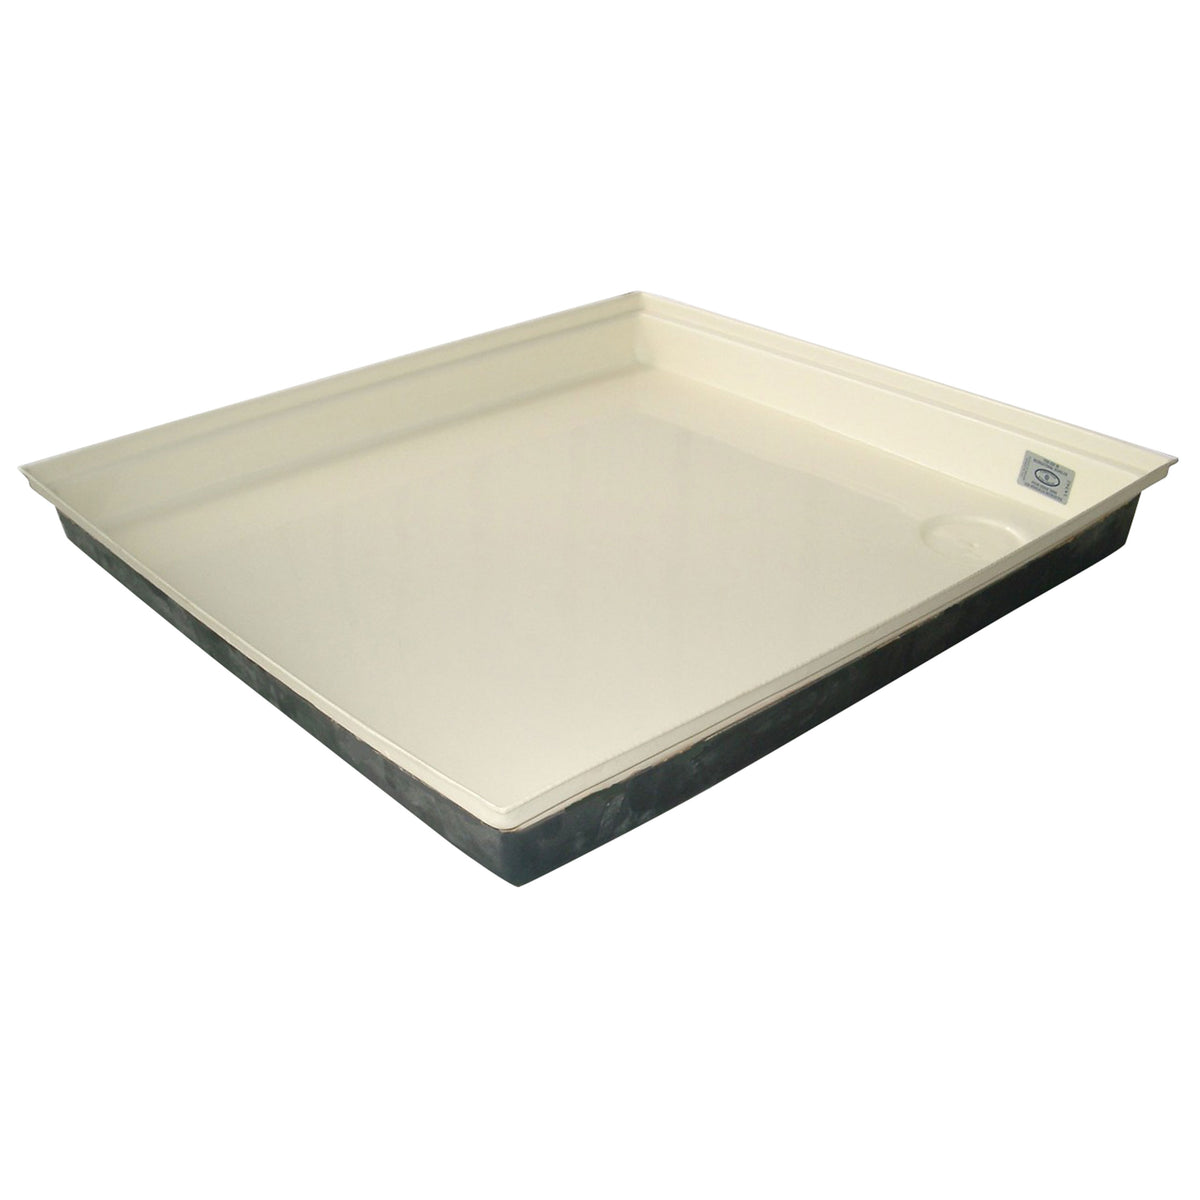 Icon 00460 Shower Pan SP100 - 27" x 24" x 4", Colonial White